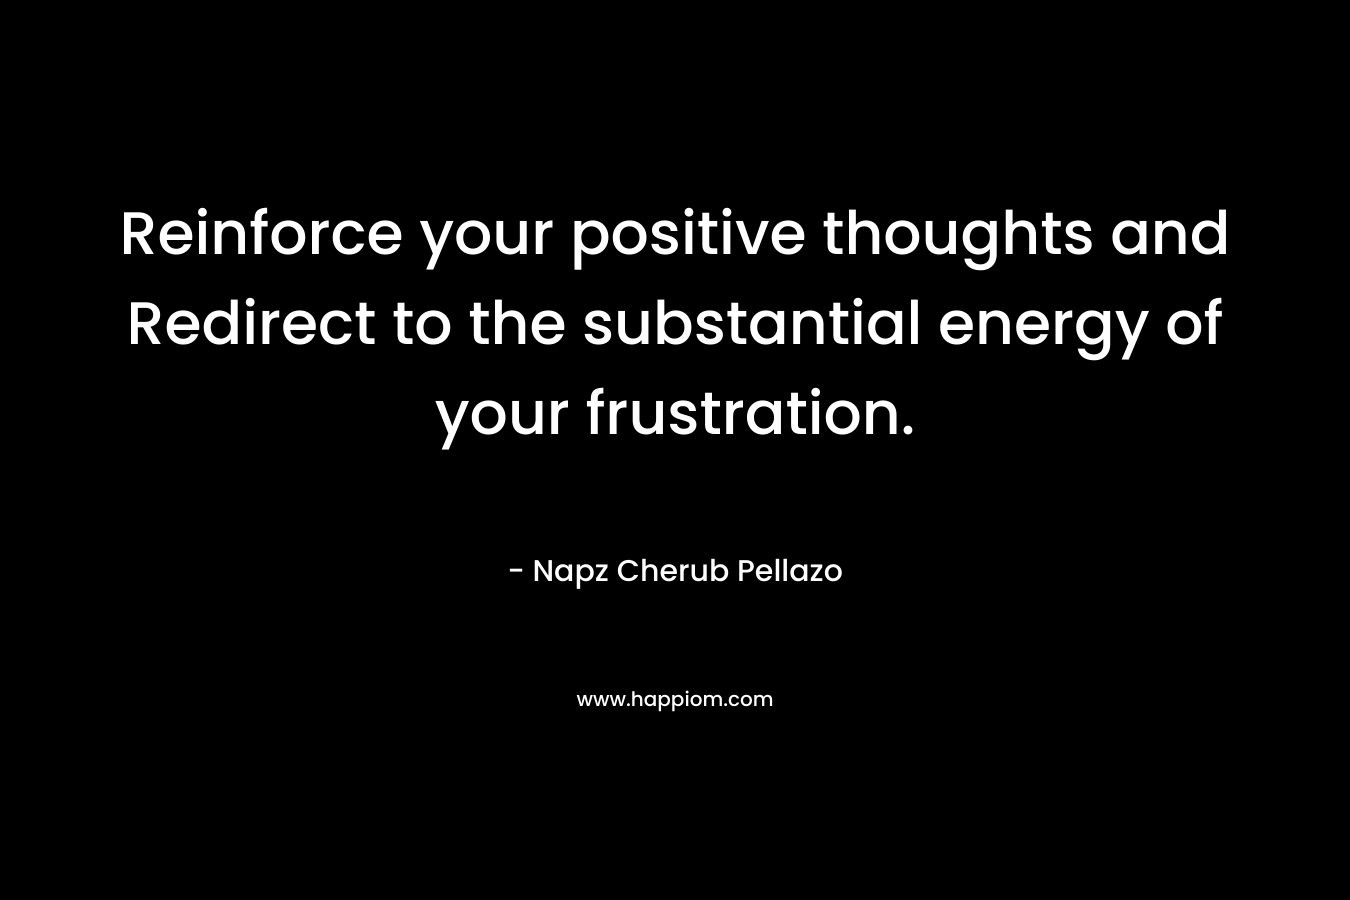 Reinforce your positive thoughts and Redirect to the substantial energy of your frustration.